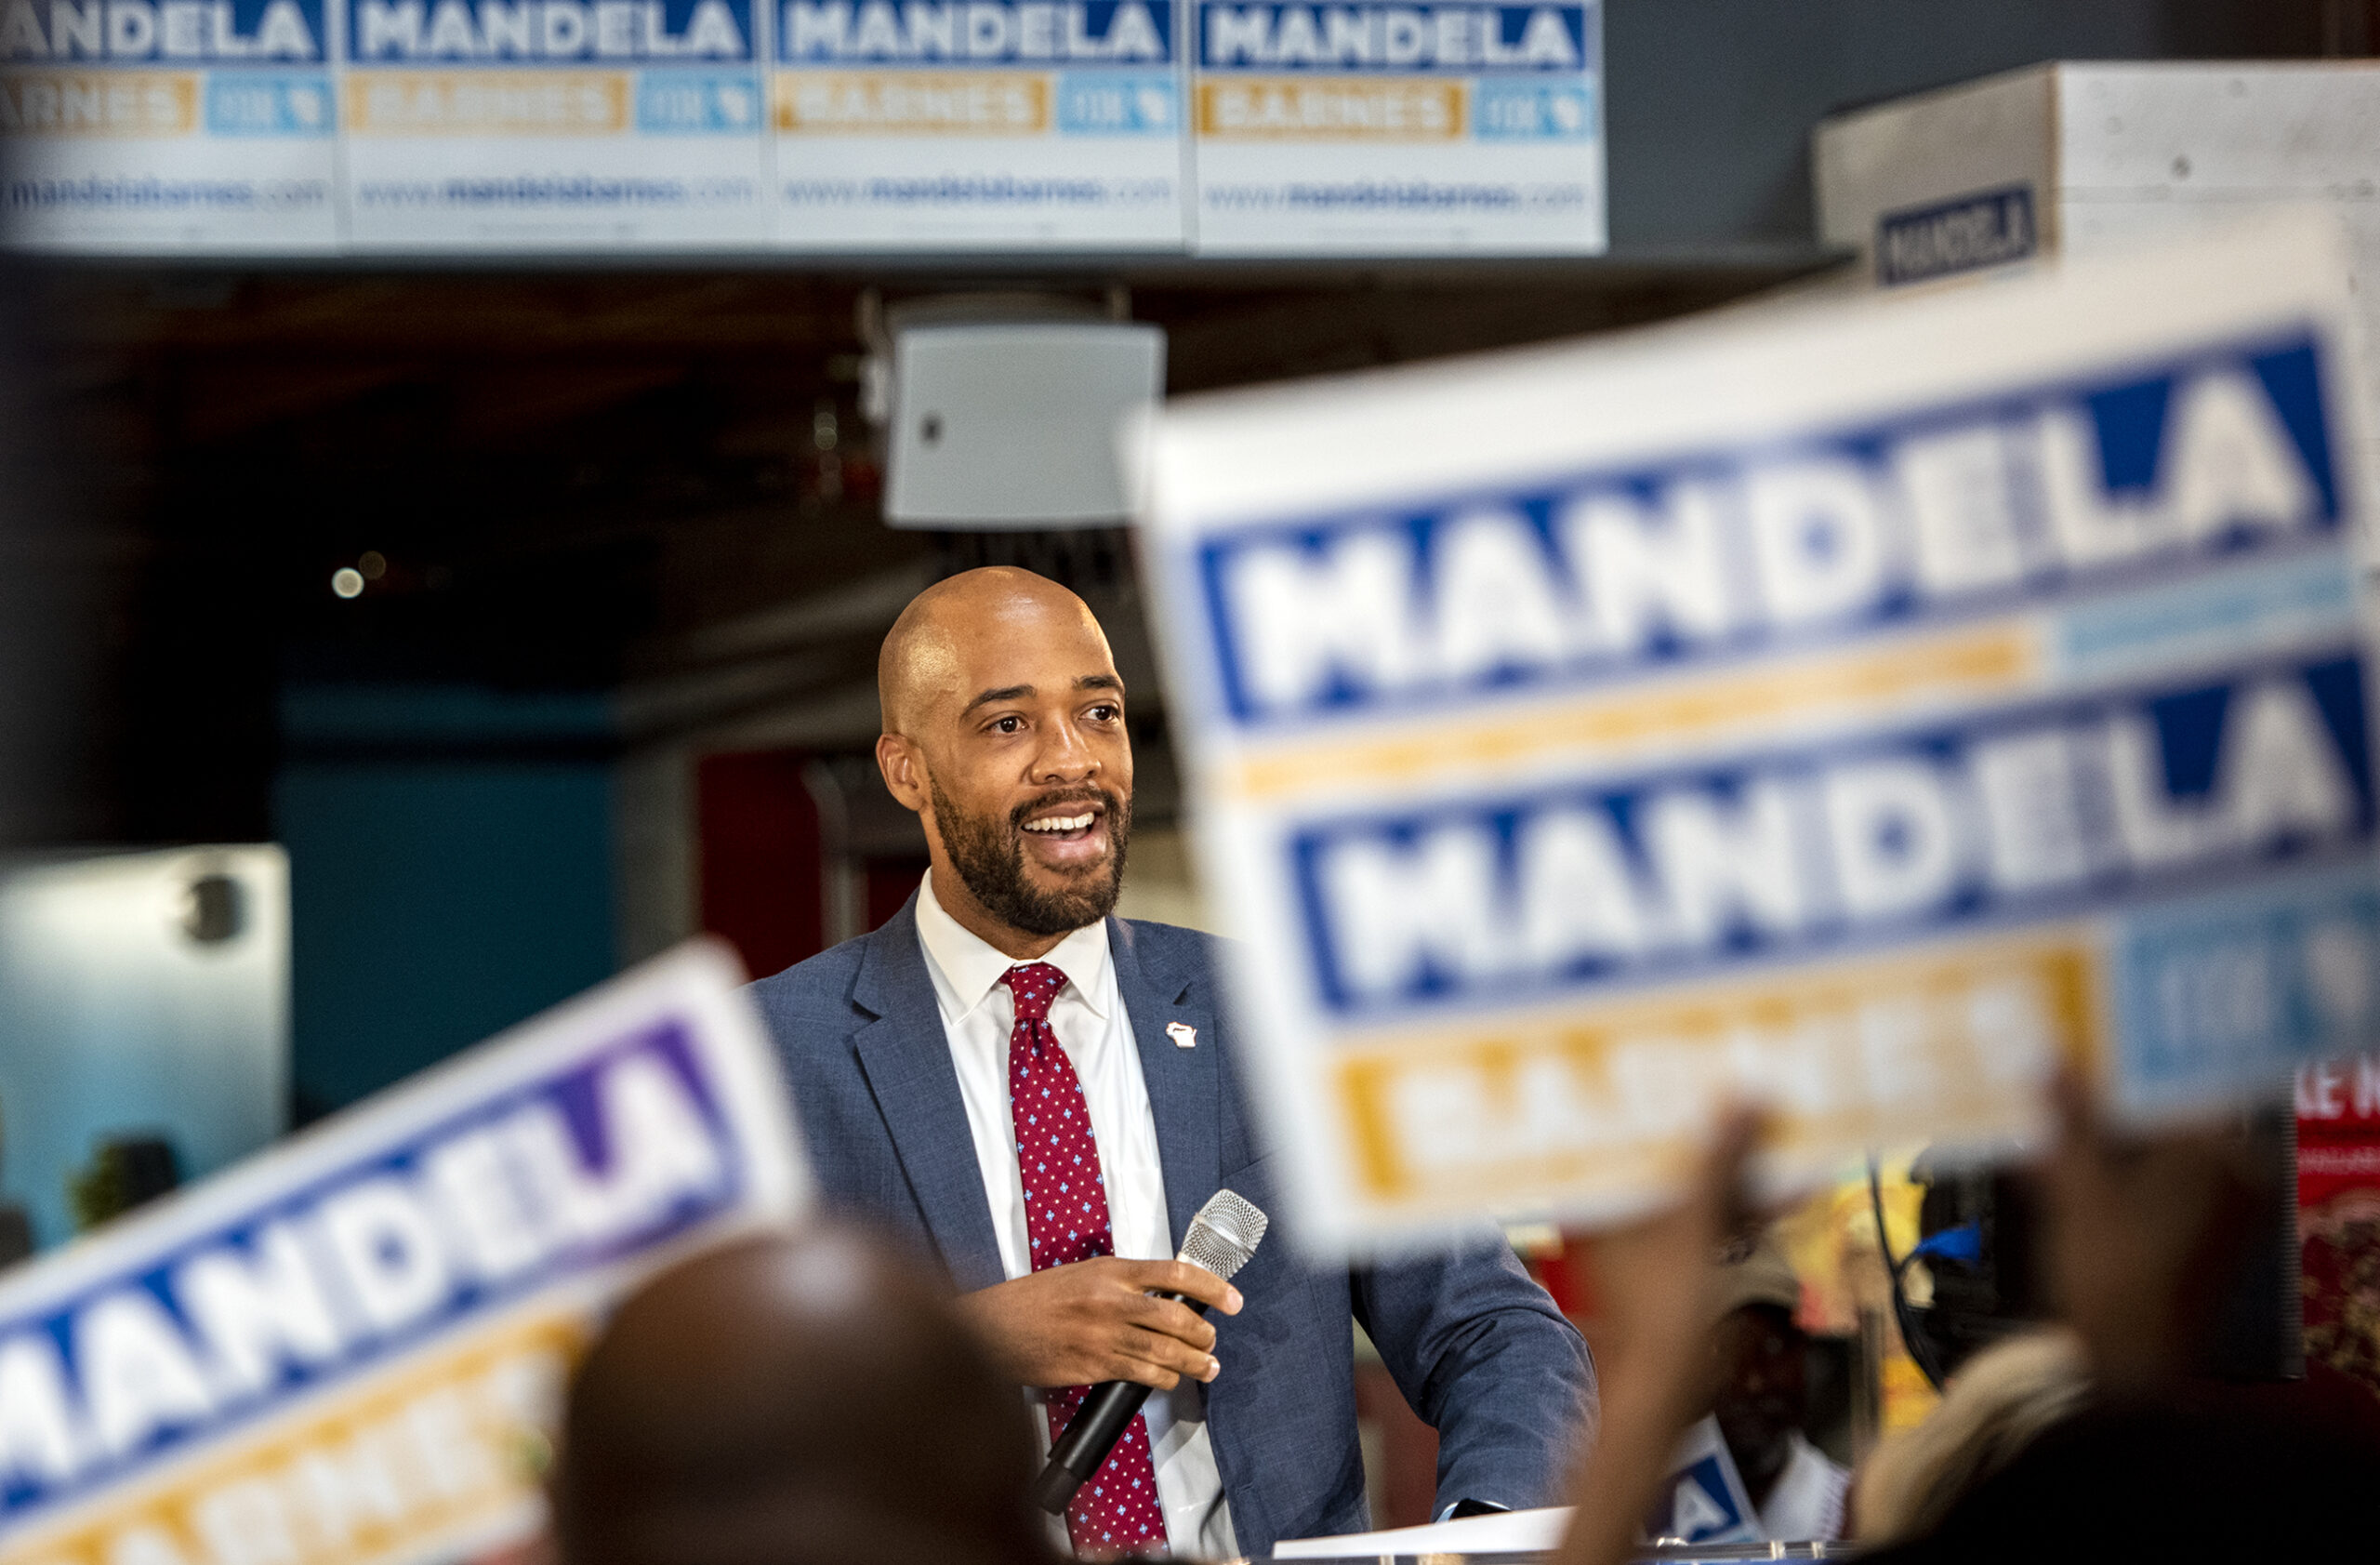 Signs that say "Mandela" on them are held up by supporters as Lt. Gov. Mandela Barnes takes the stage.